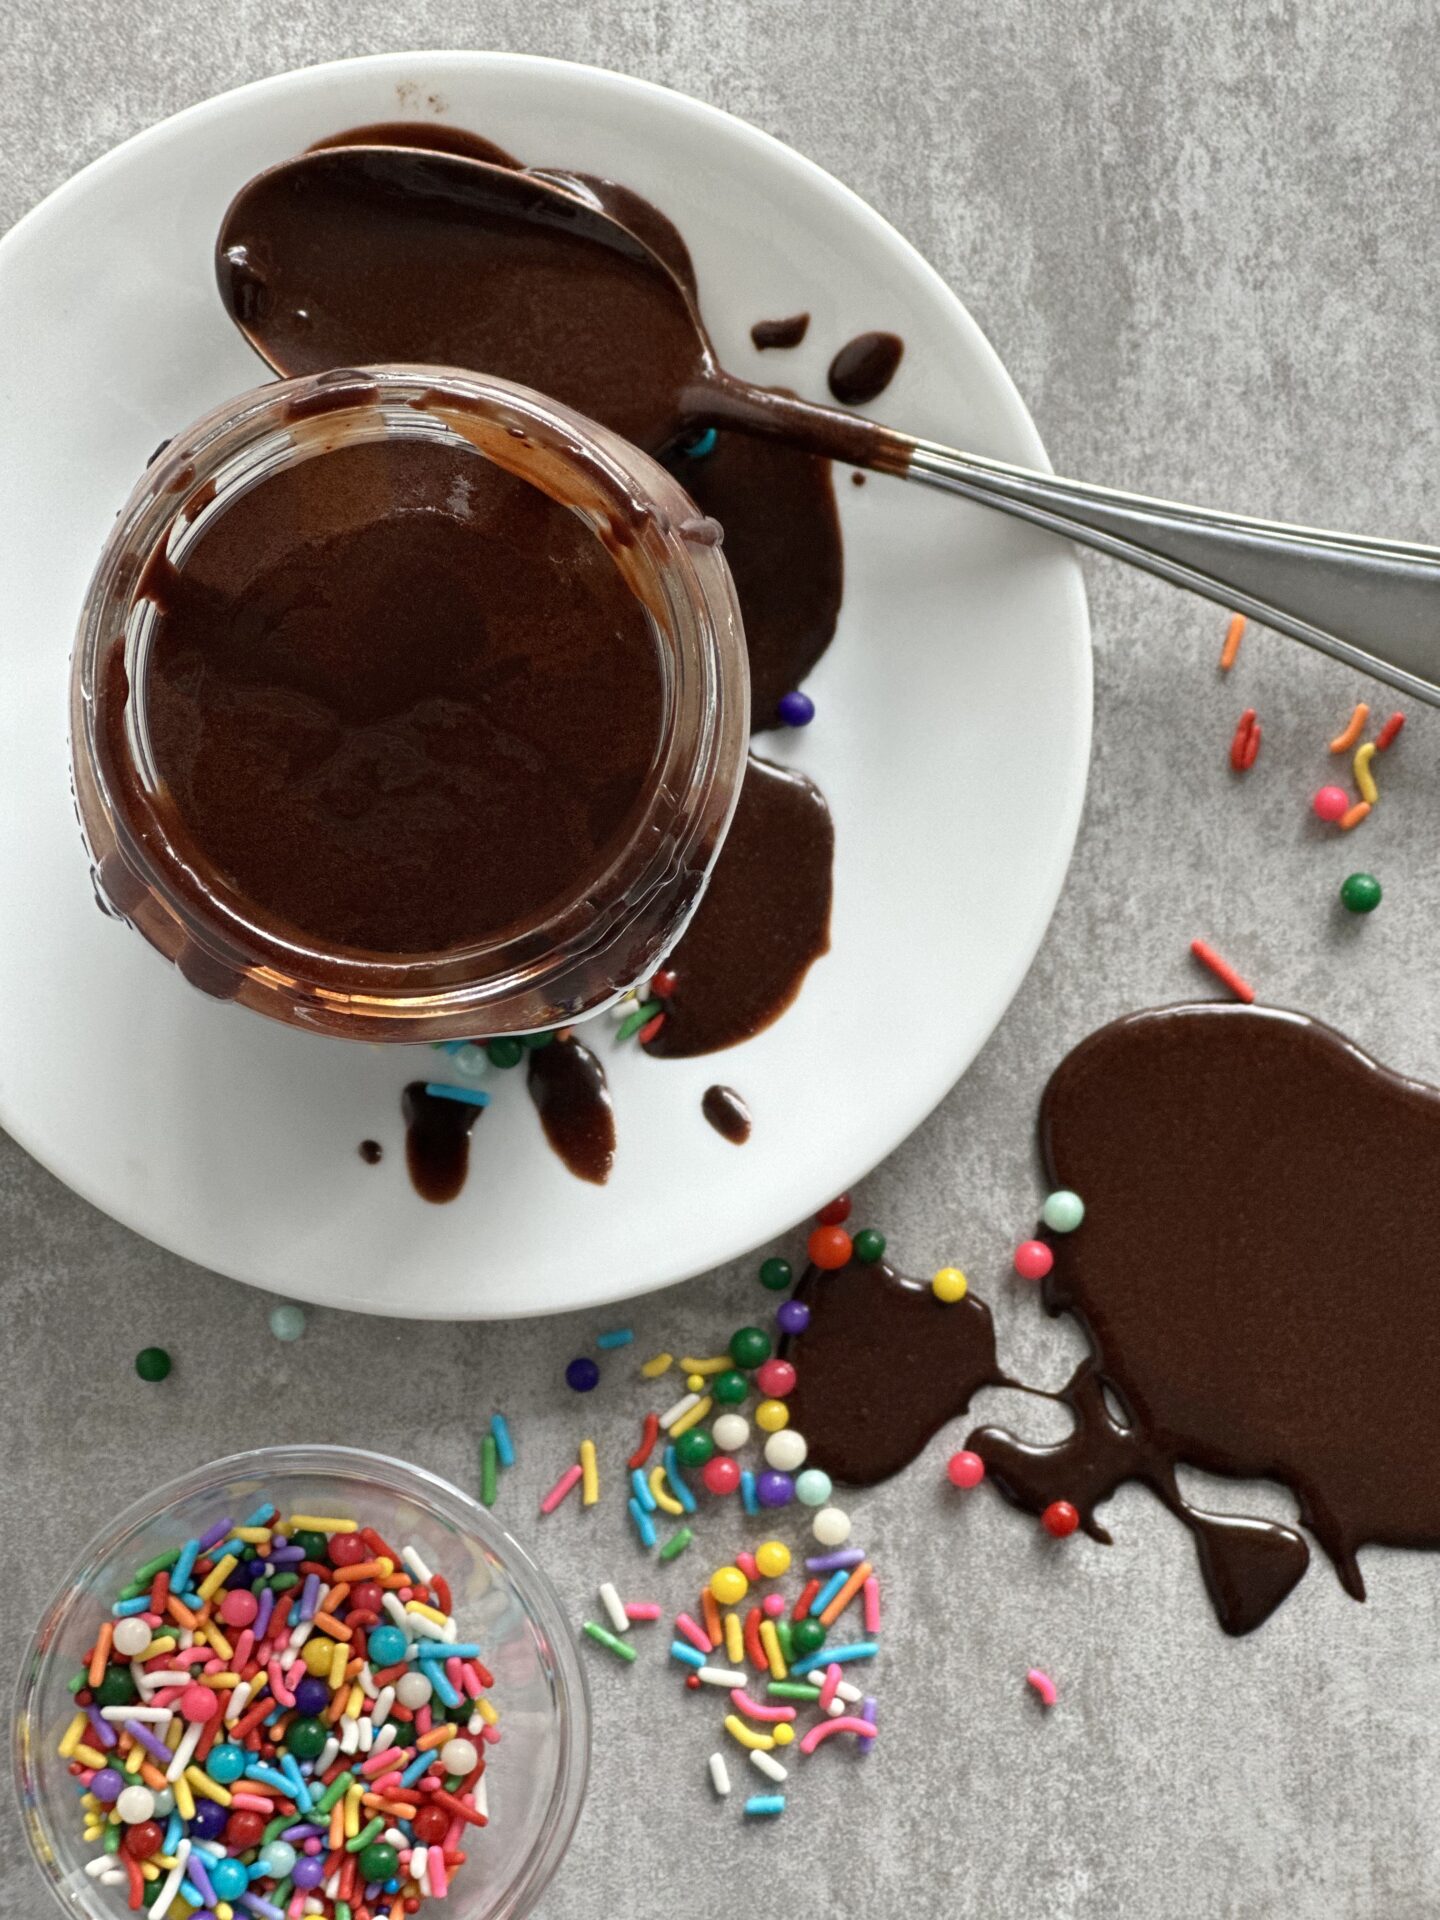 Jar of Hot Chocolate Fudge Sauce seen from above, surrounded by spilled sauce and colourful sprinkles